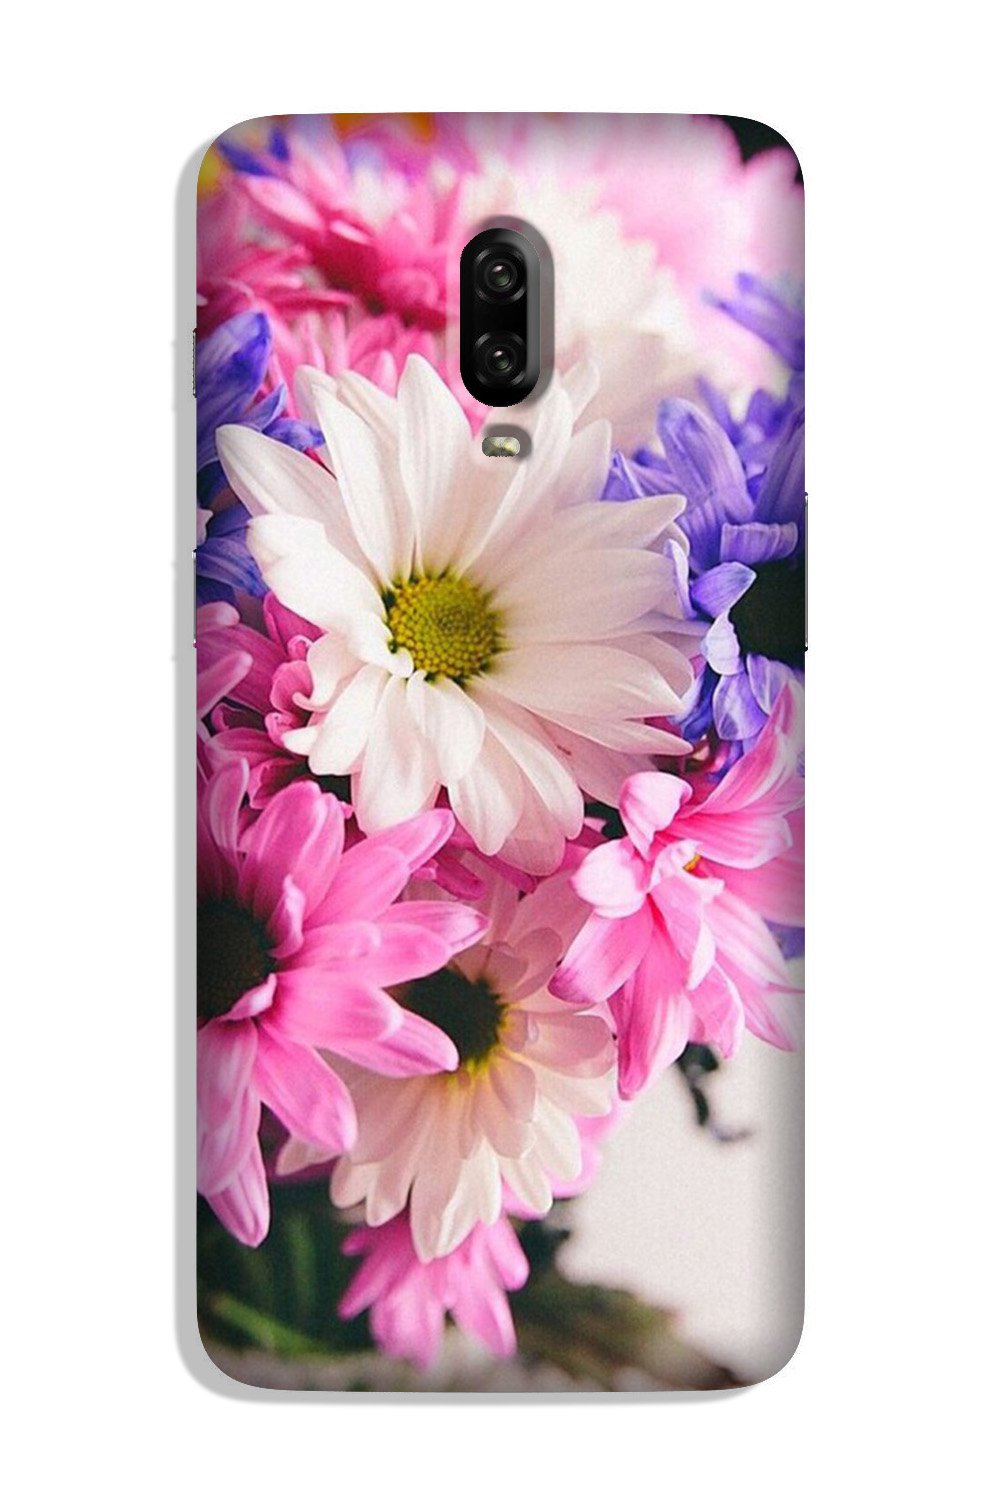 Coloful Daisy Case for OnePlus 6T